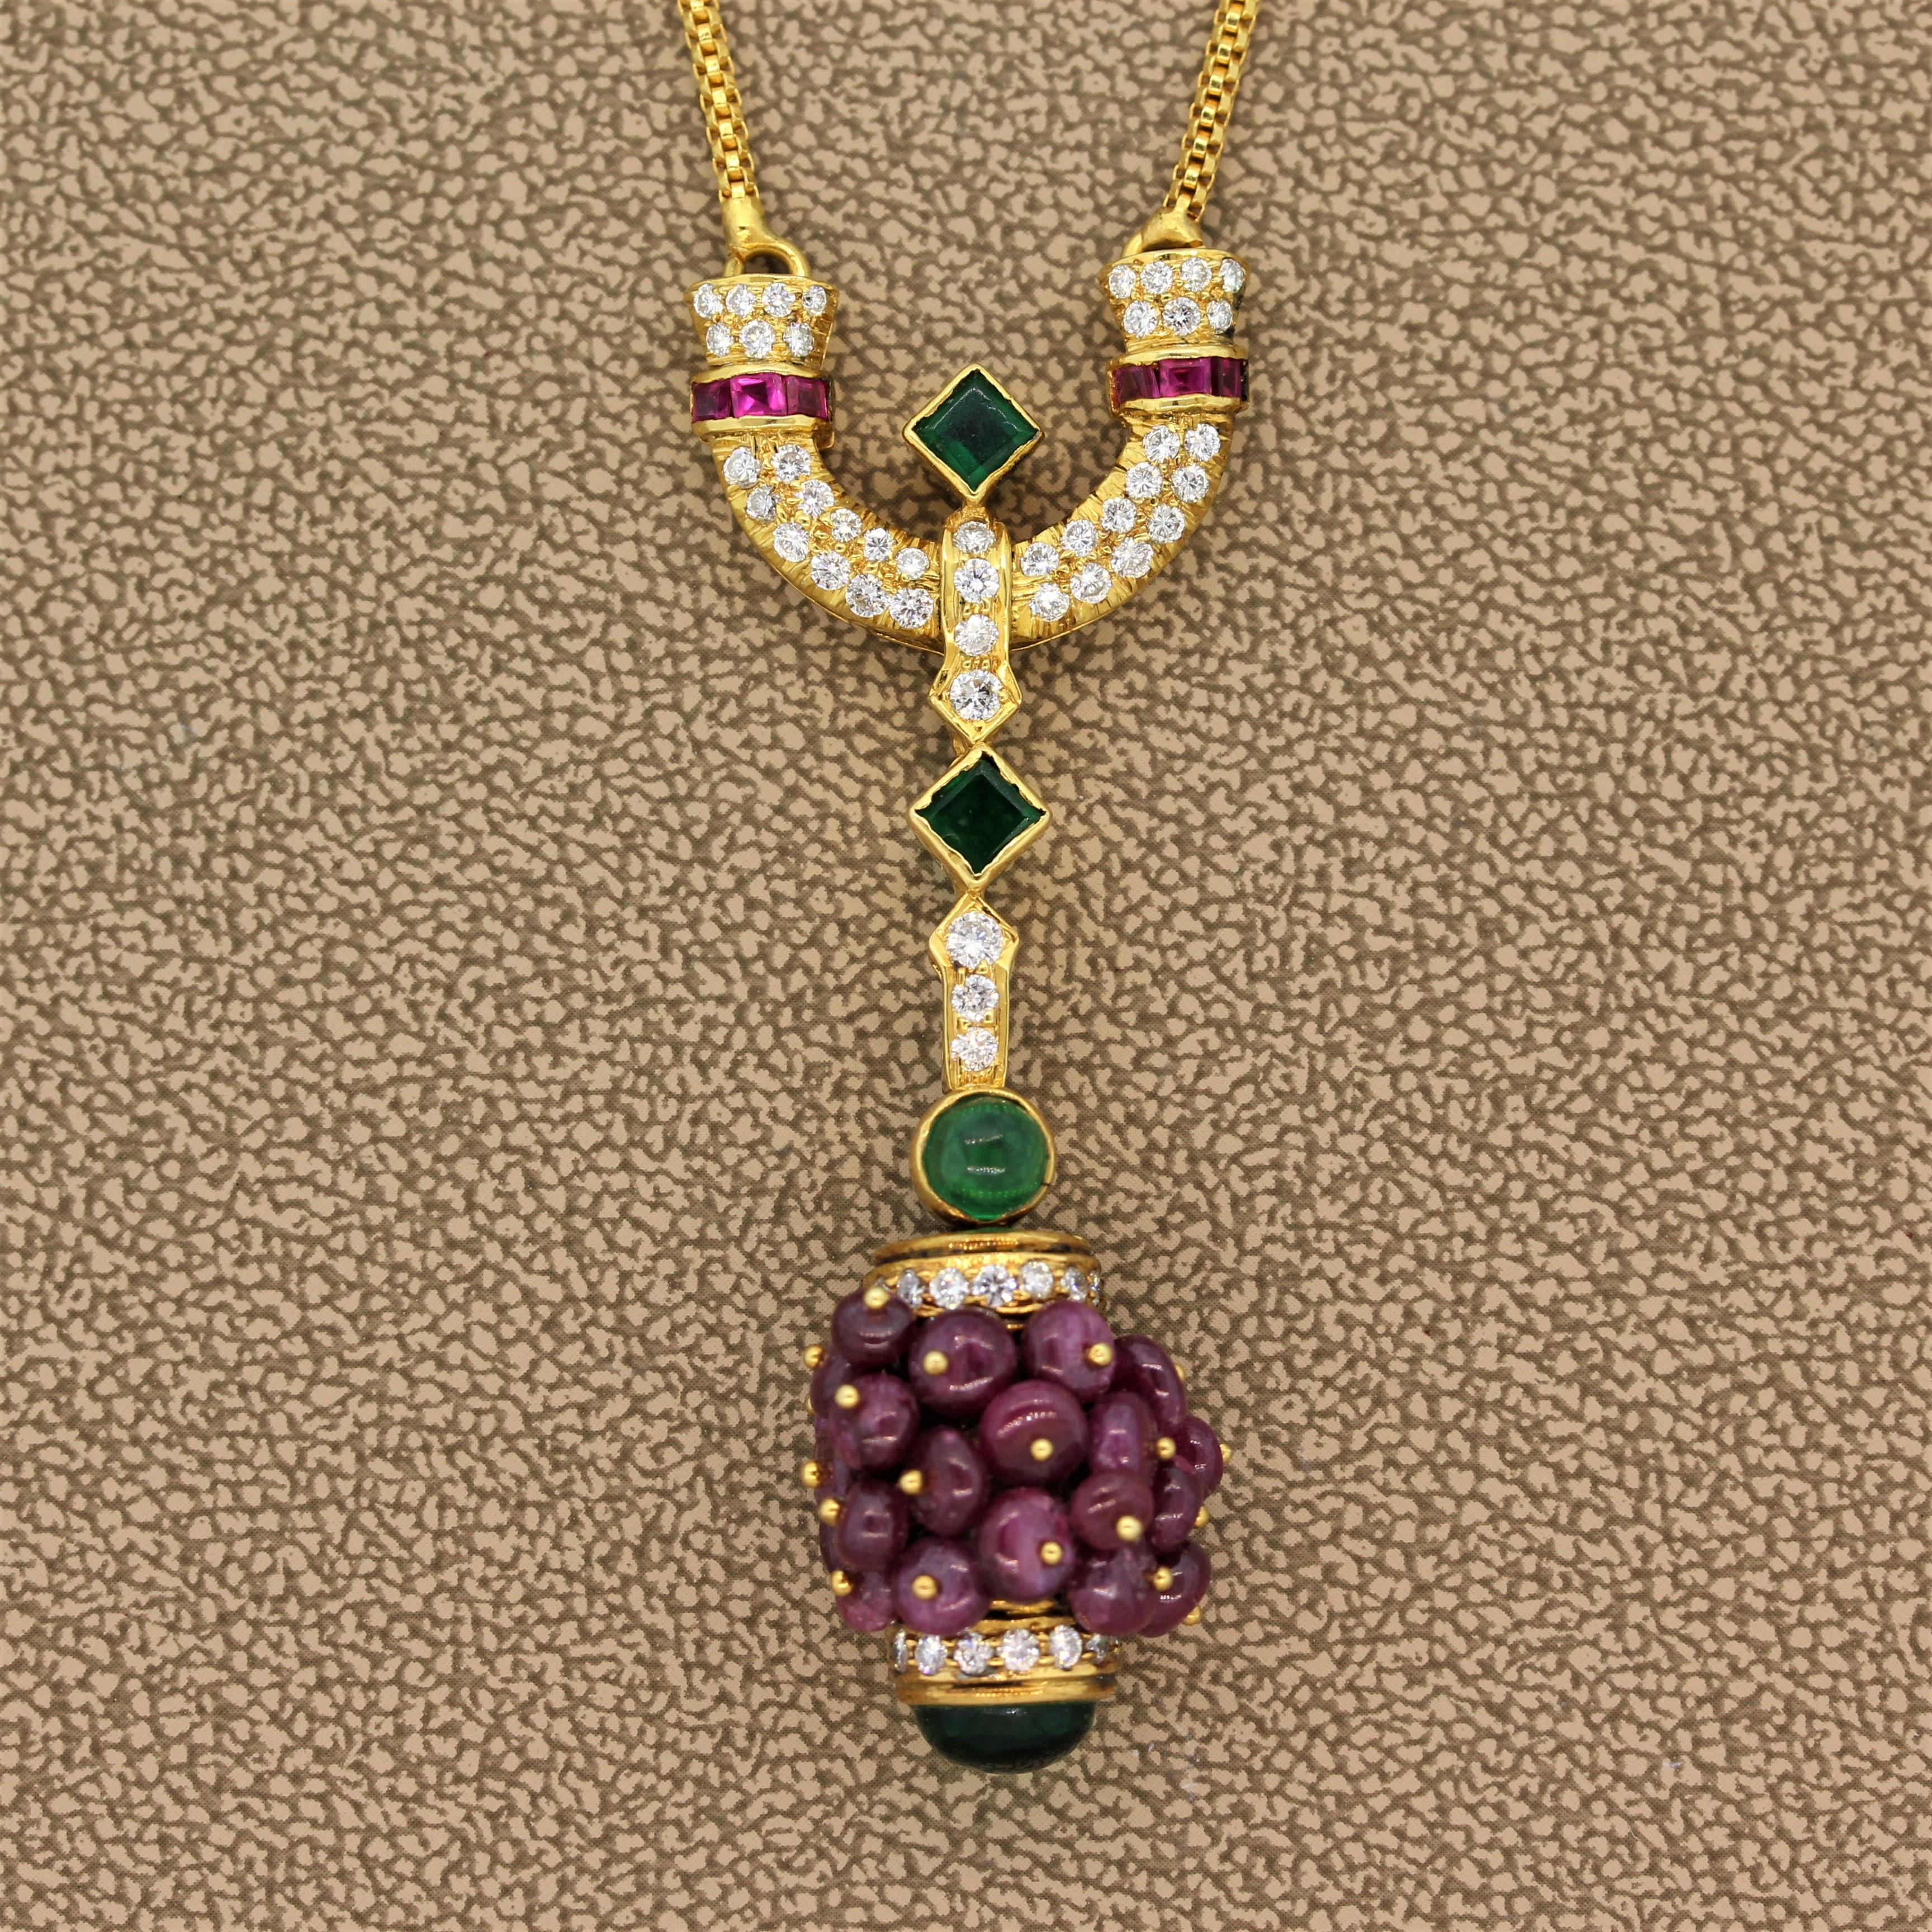 This estate drop necklace features approximately 15.00 carats of beaded ruby  and cabochon emeralds in a bezel setting. They are accented by 0.90 carats of round cut diamonds in a 22K yellow gold hand made setting. A true one of a kind